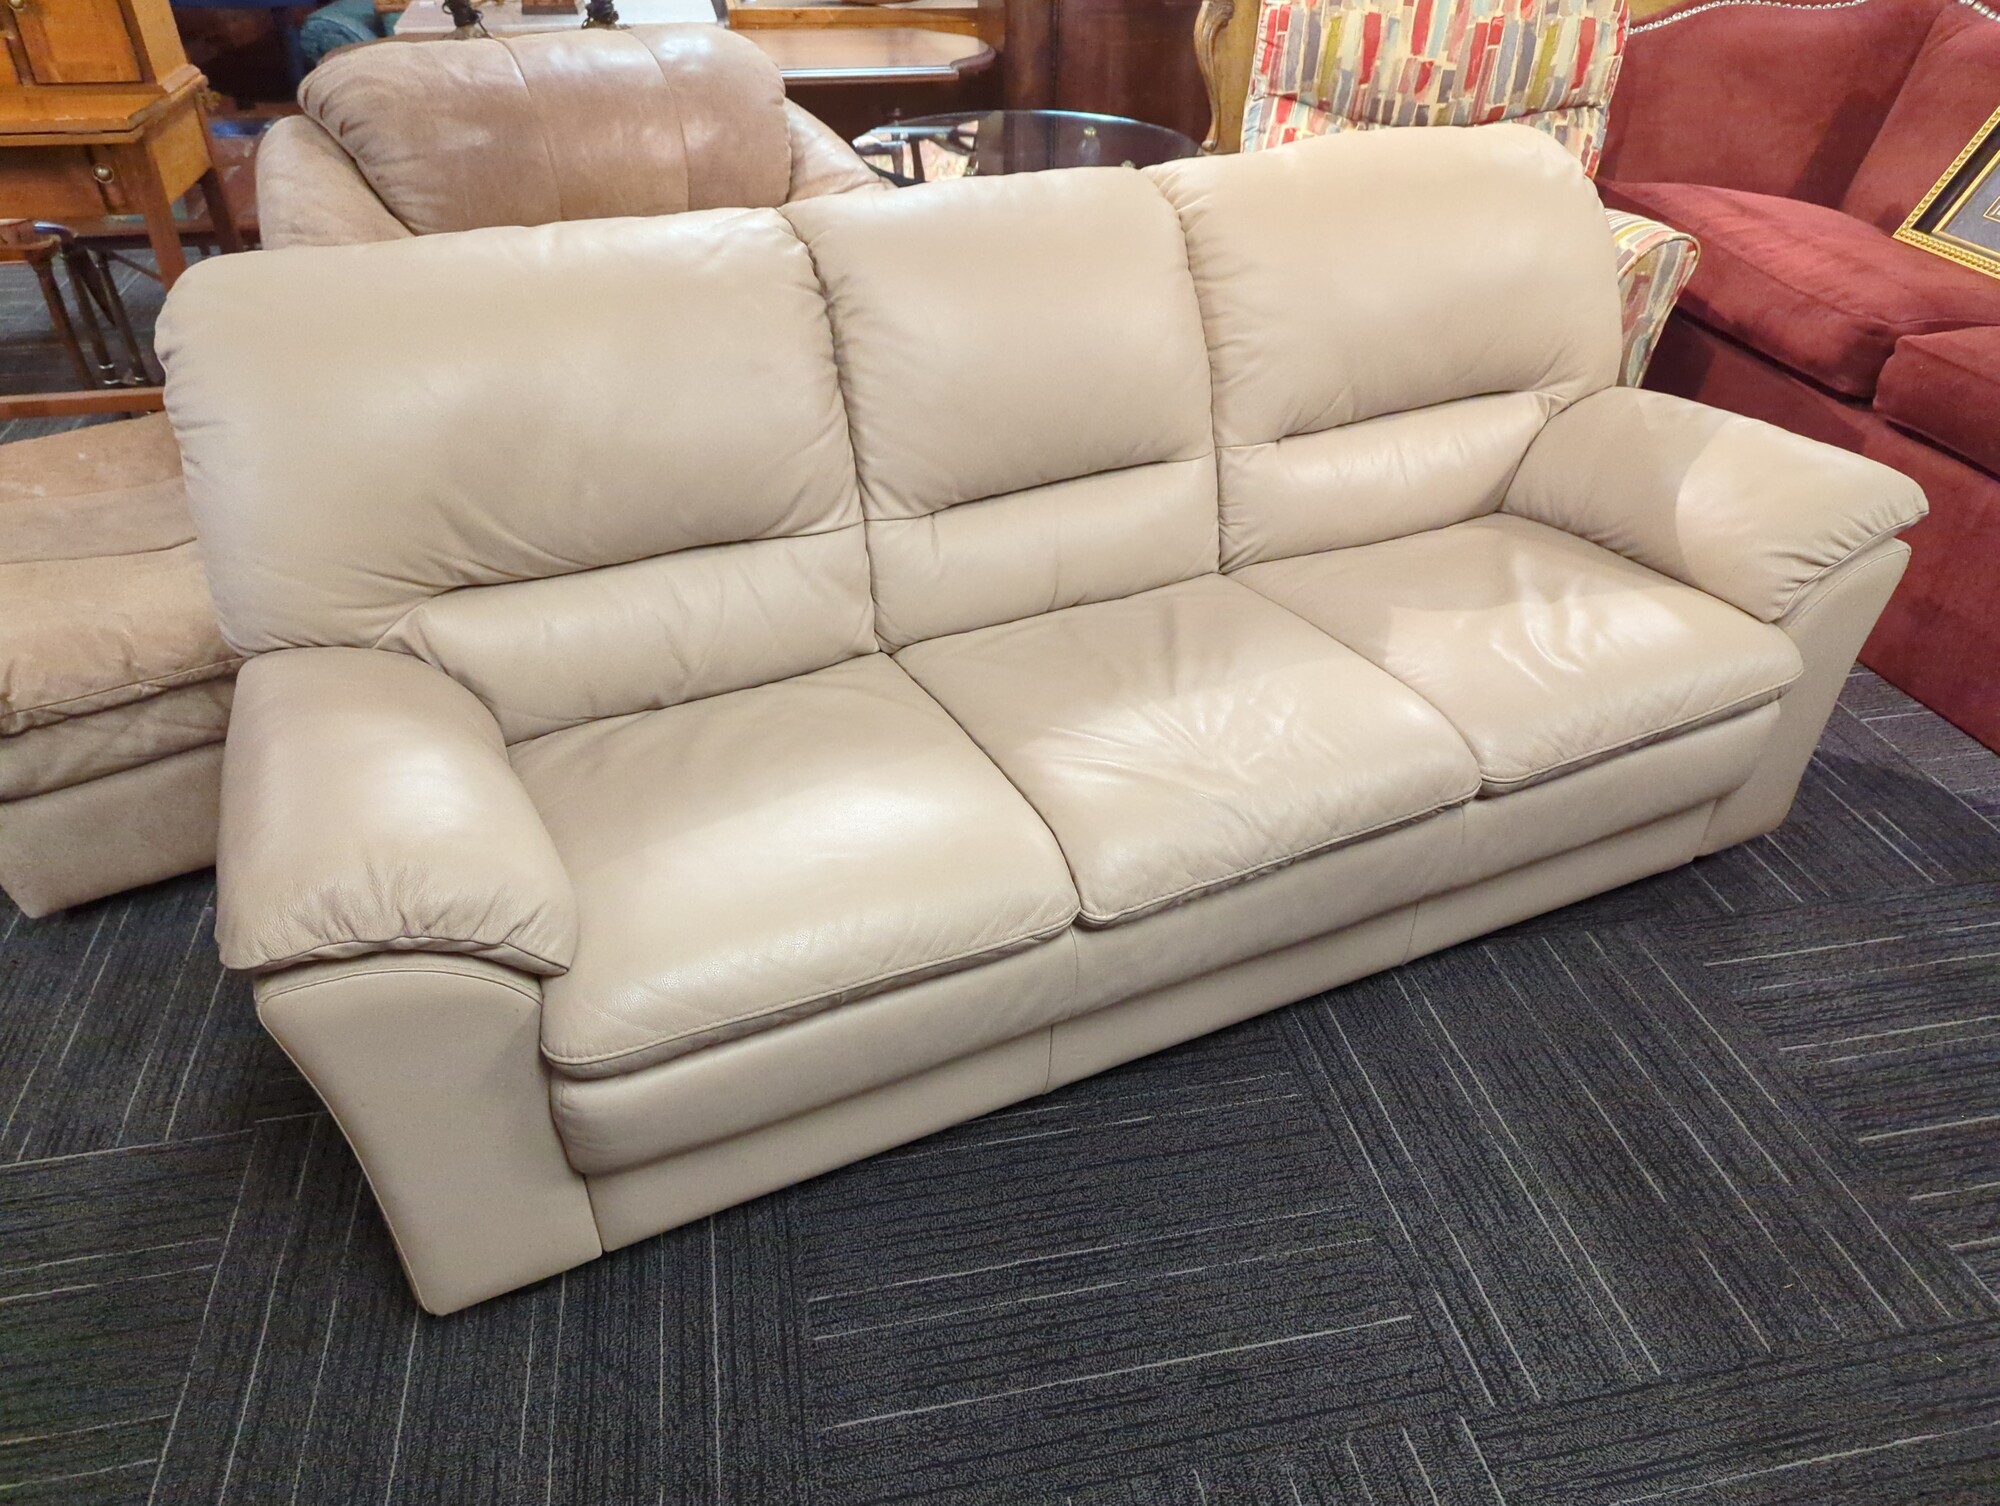 Leather sofa. 77in wide.